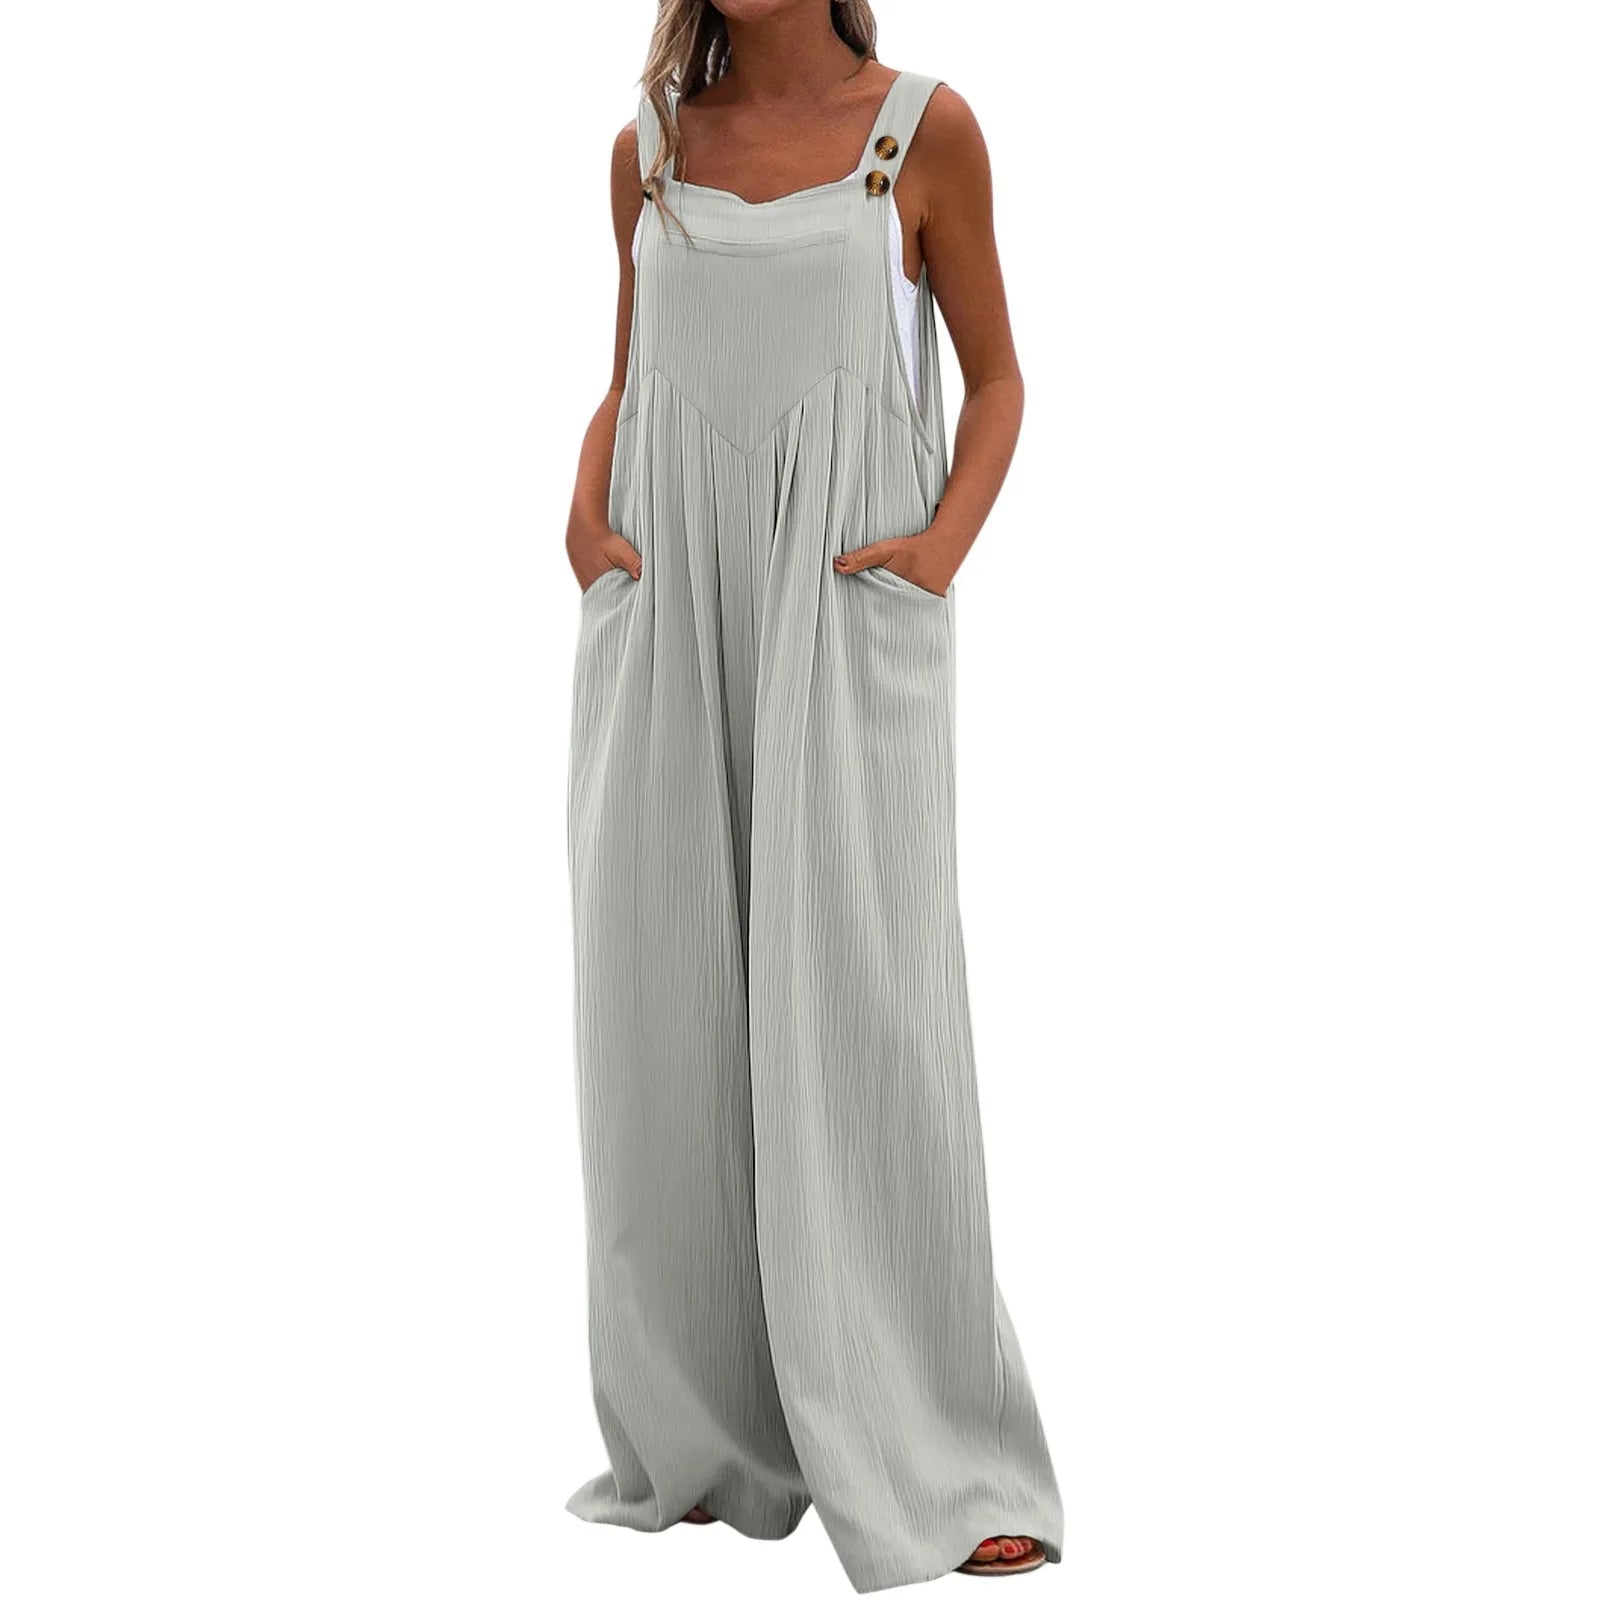 Chic Cotton Linen Women's Rompers: Casual Wide-Leg Jumpsuit for Holiday Beachwear